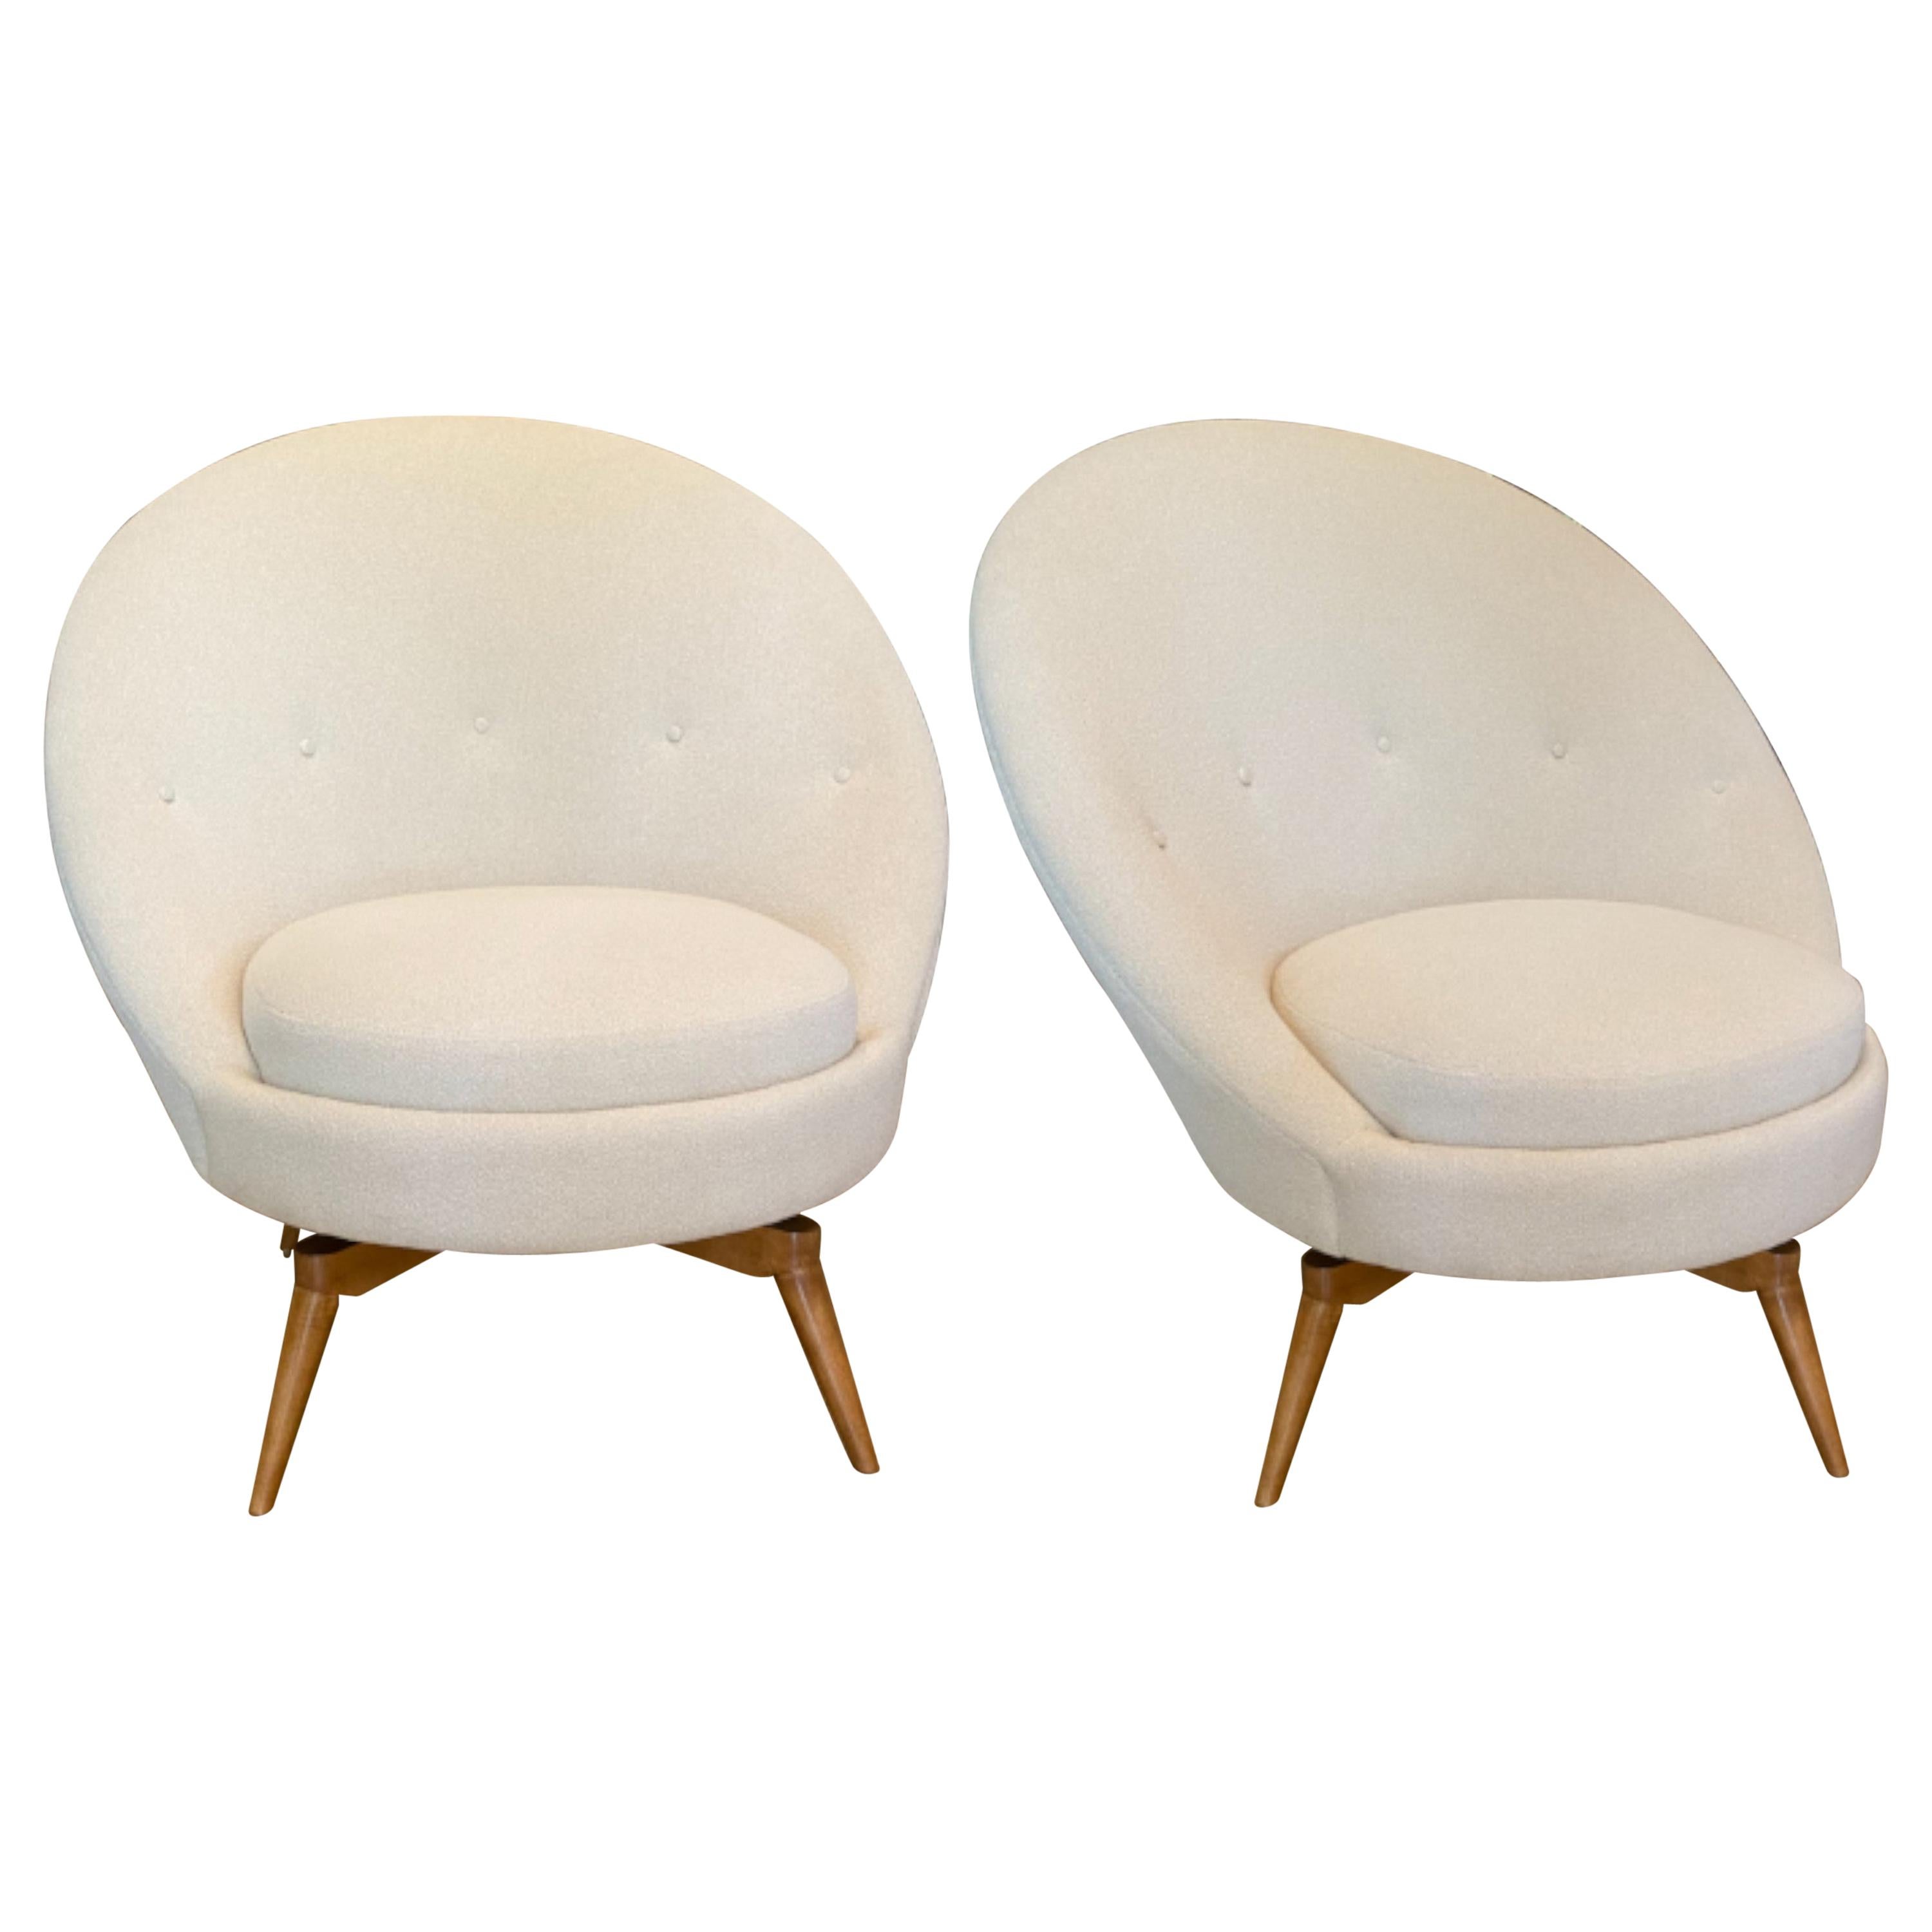 Pair of Swivel Chairs in White Boucle with Natural Maple Base